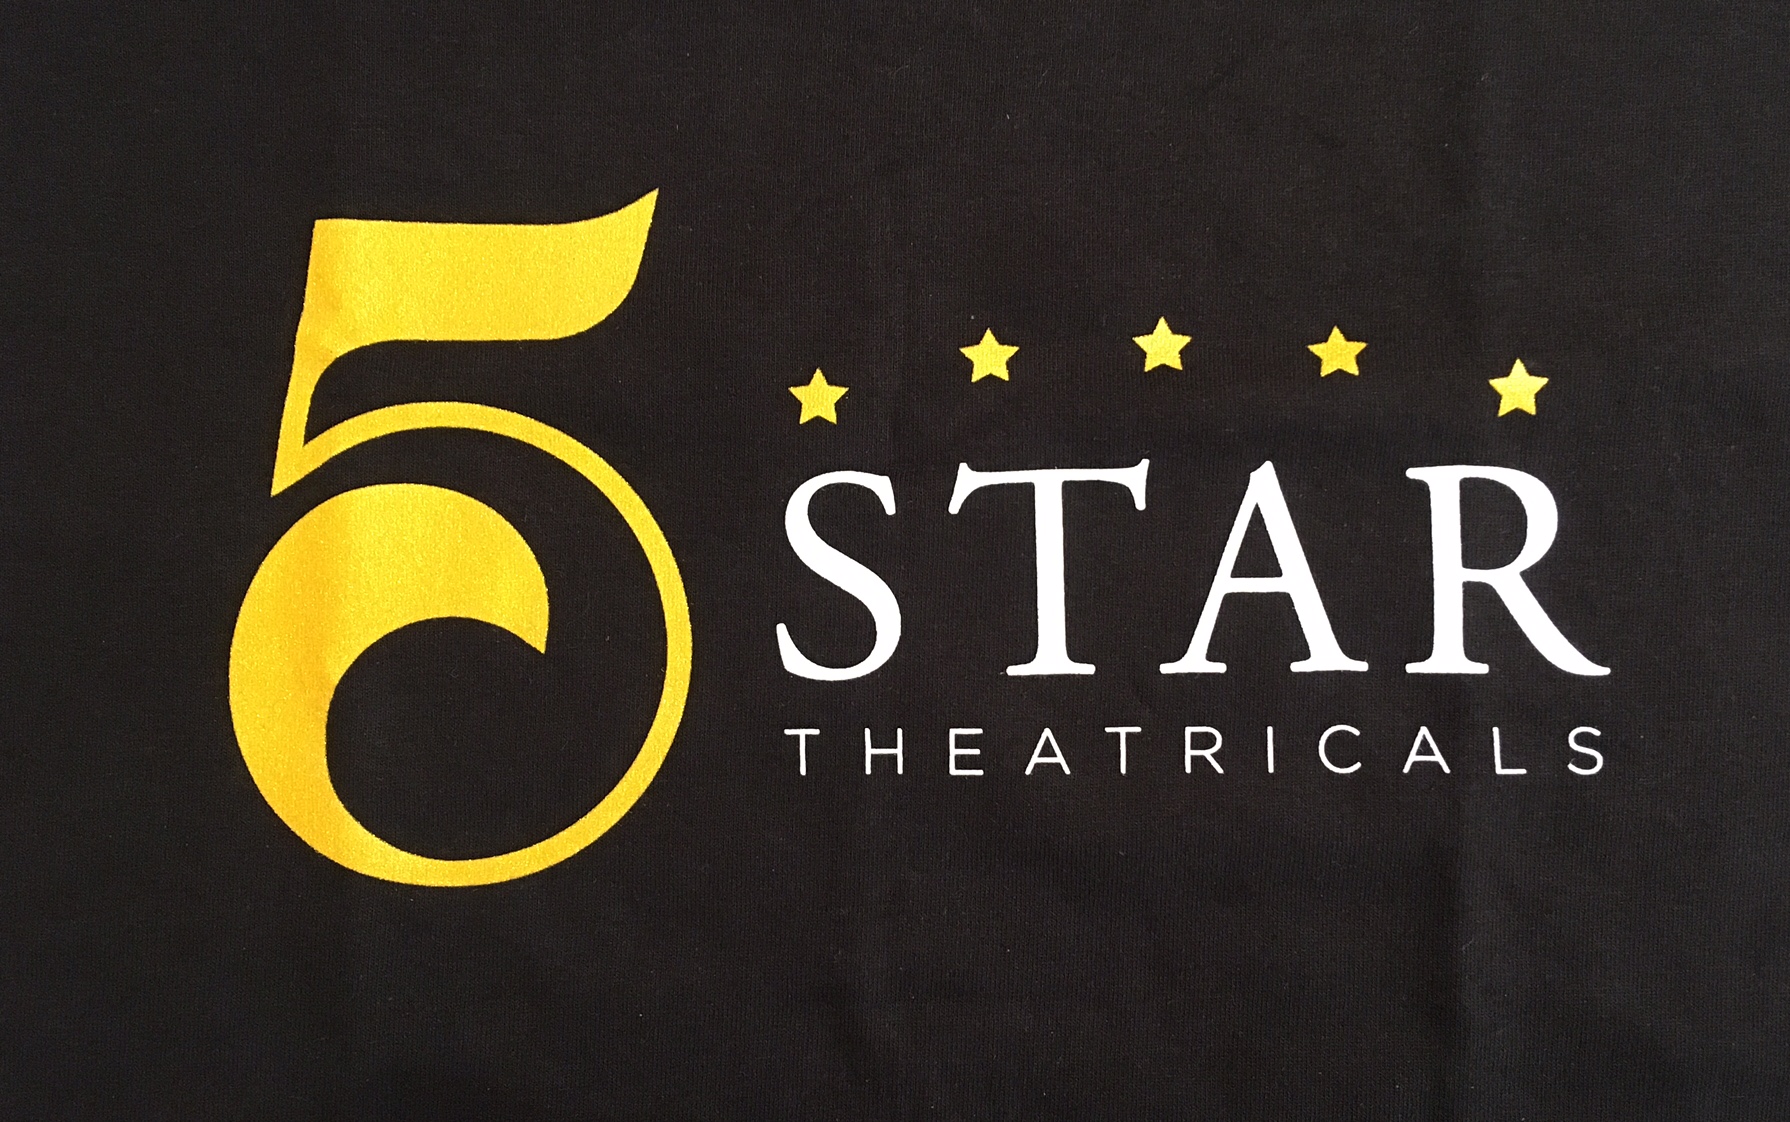 Cabrillo Music Theatre Changes Its Name To 5 Star Theatricals